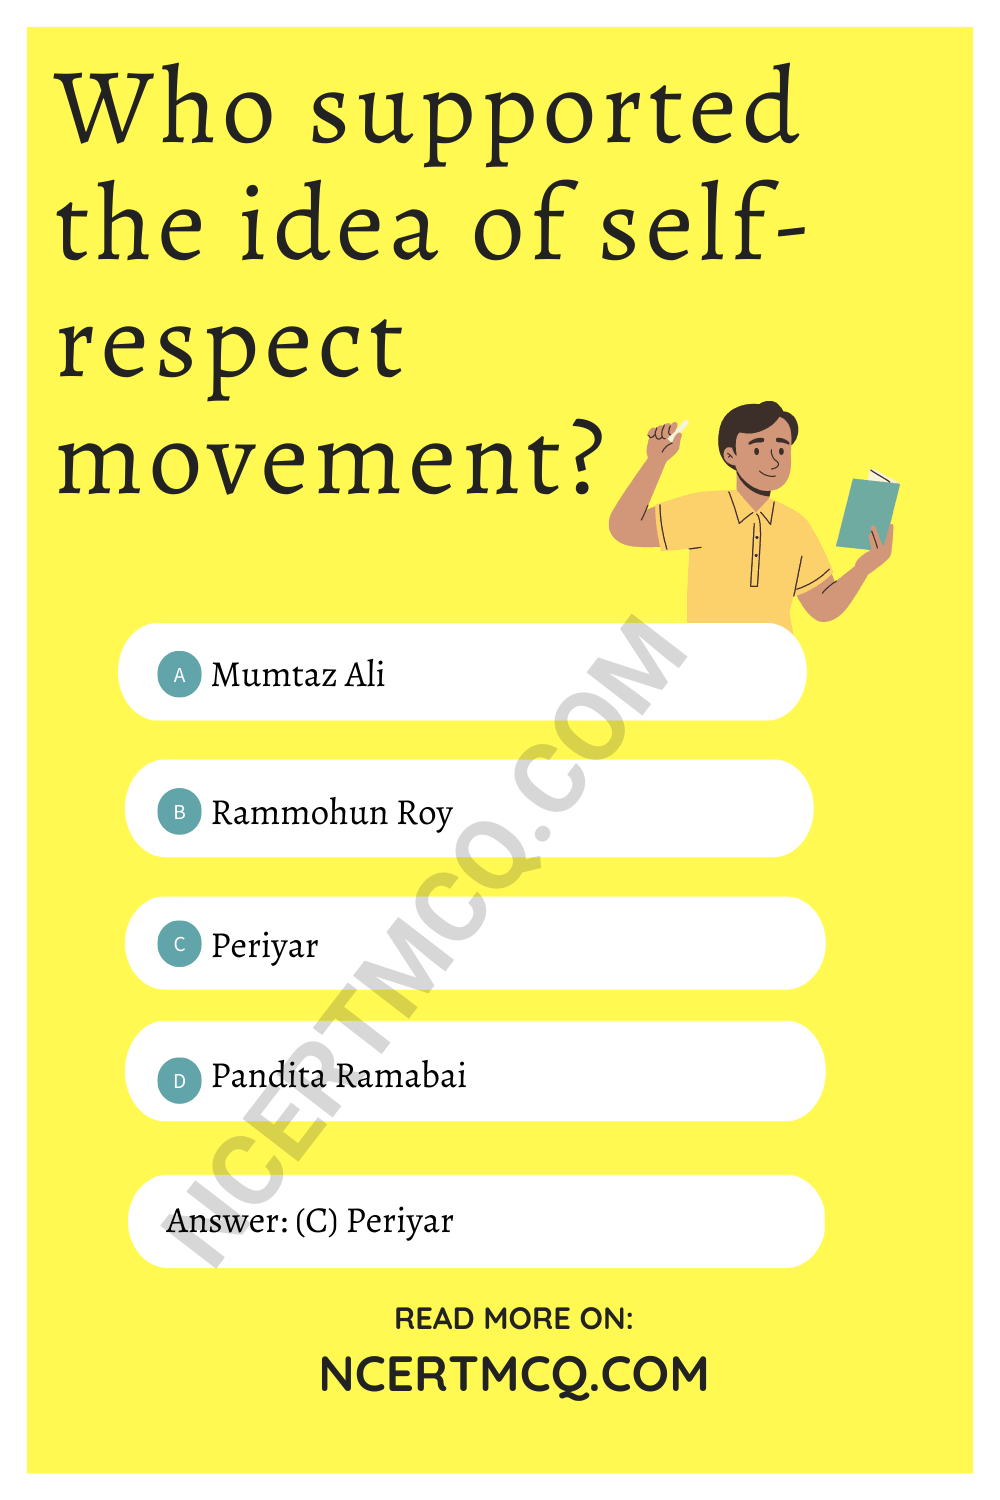 Who supported the idea of self-respect movement?